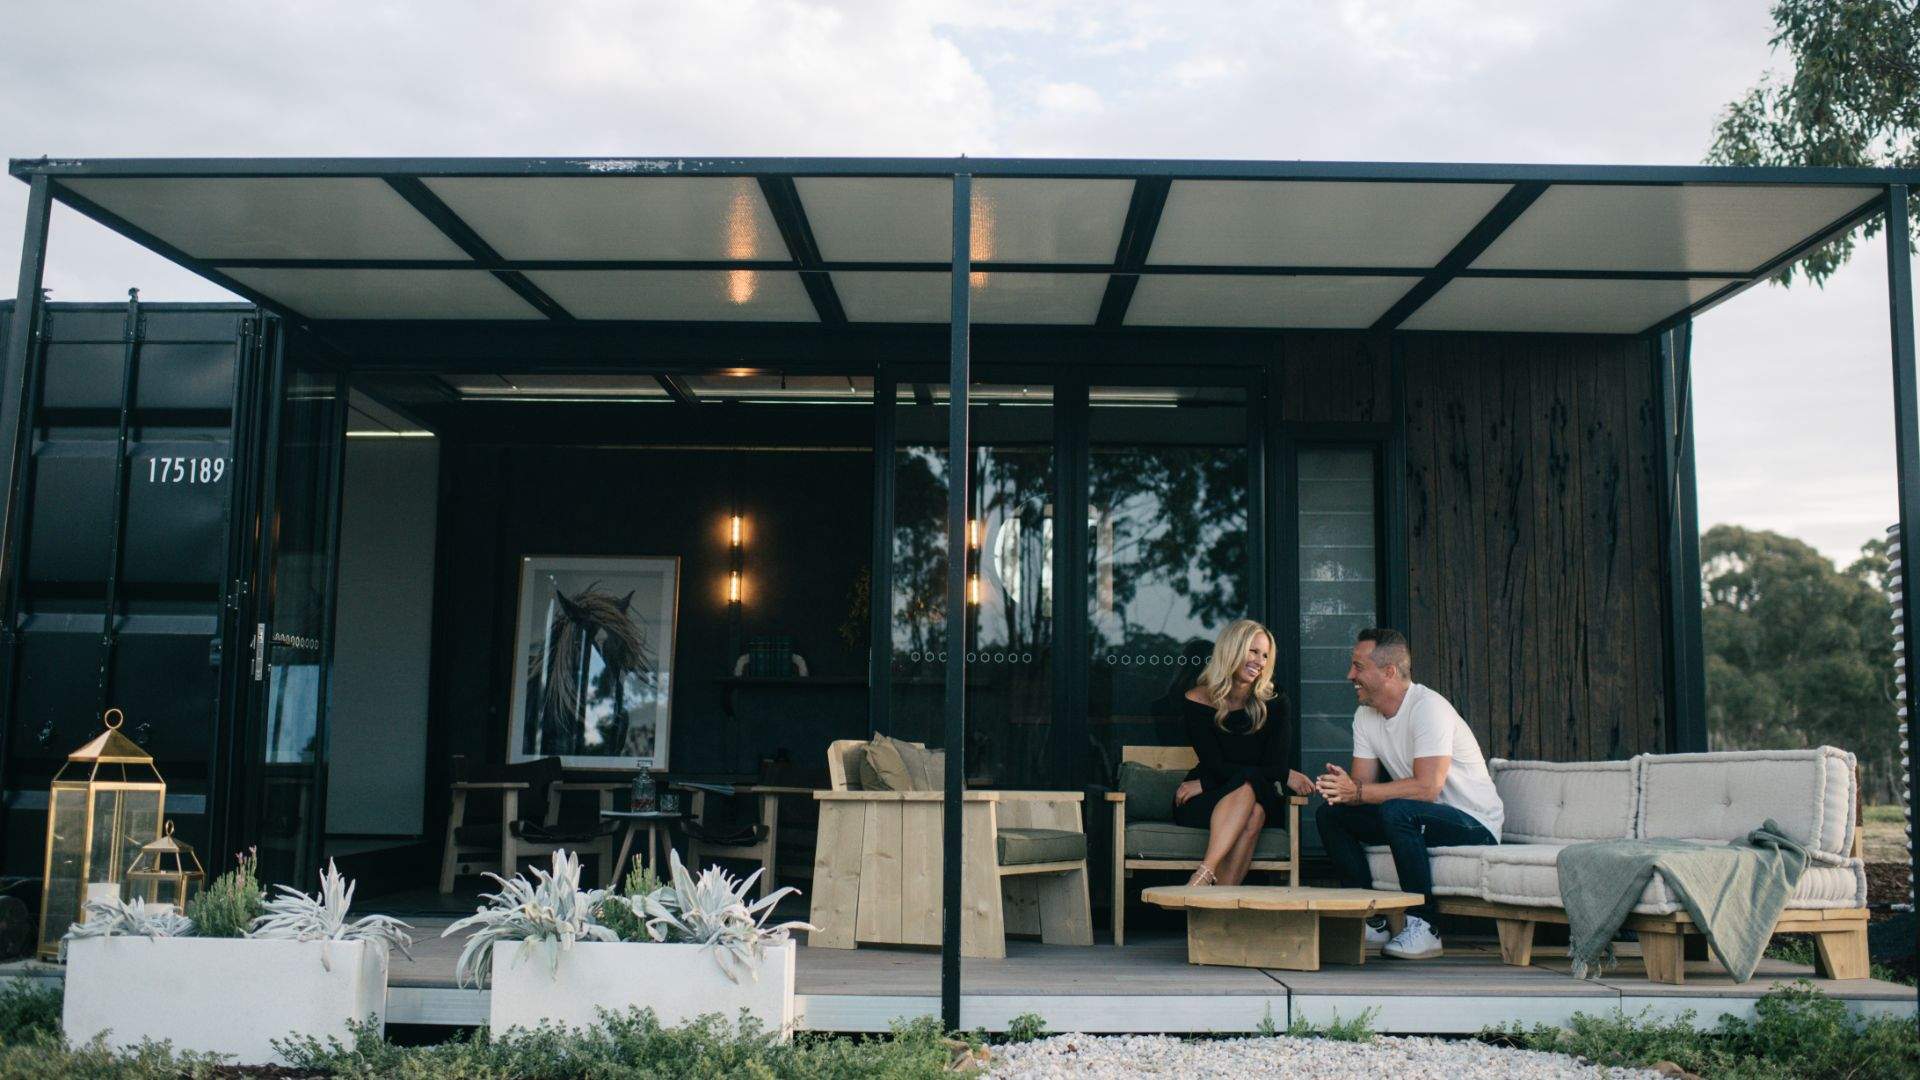 Two Shipping Container Hotels Are Popping Up in Victoria's Wine Country This Autumn